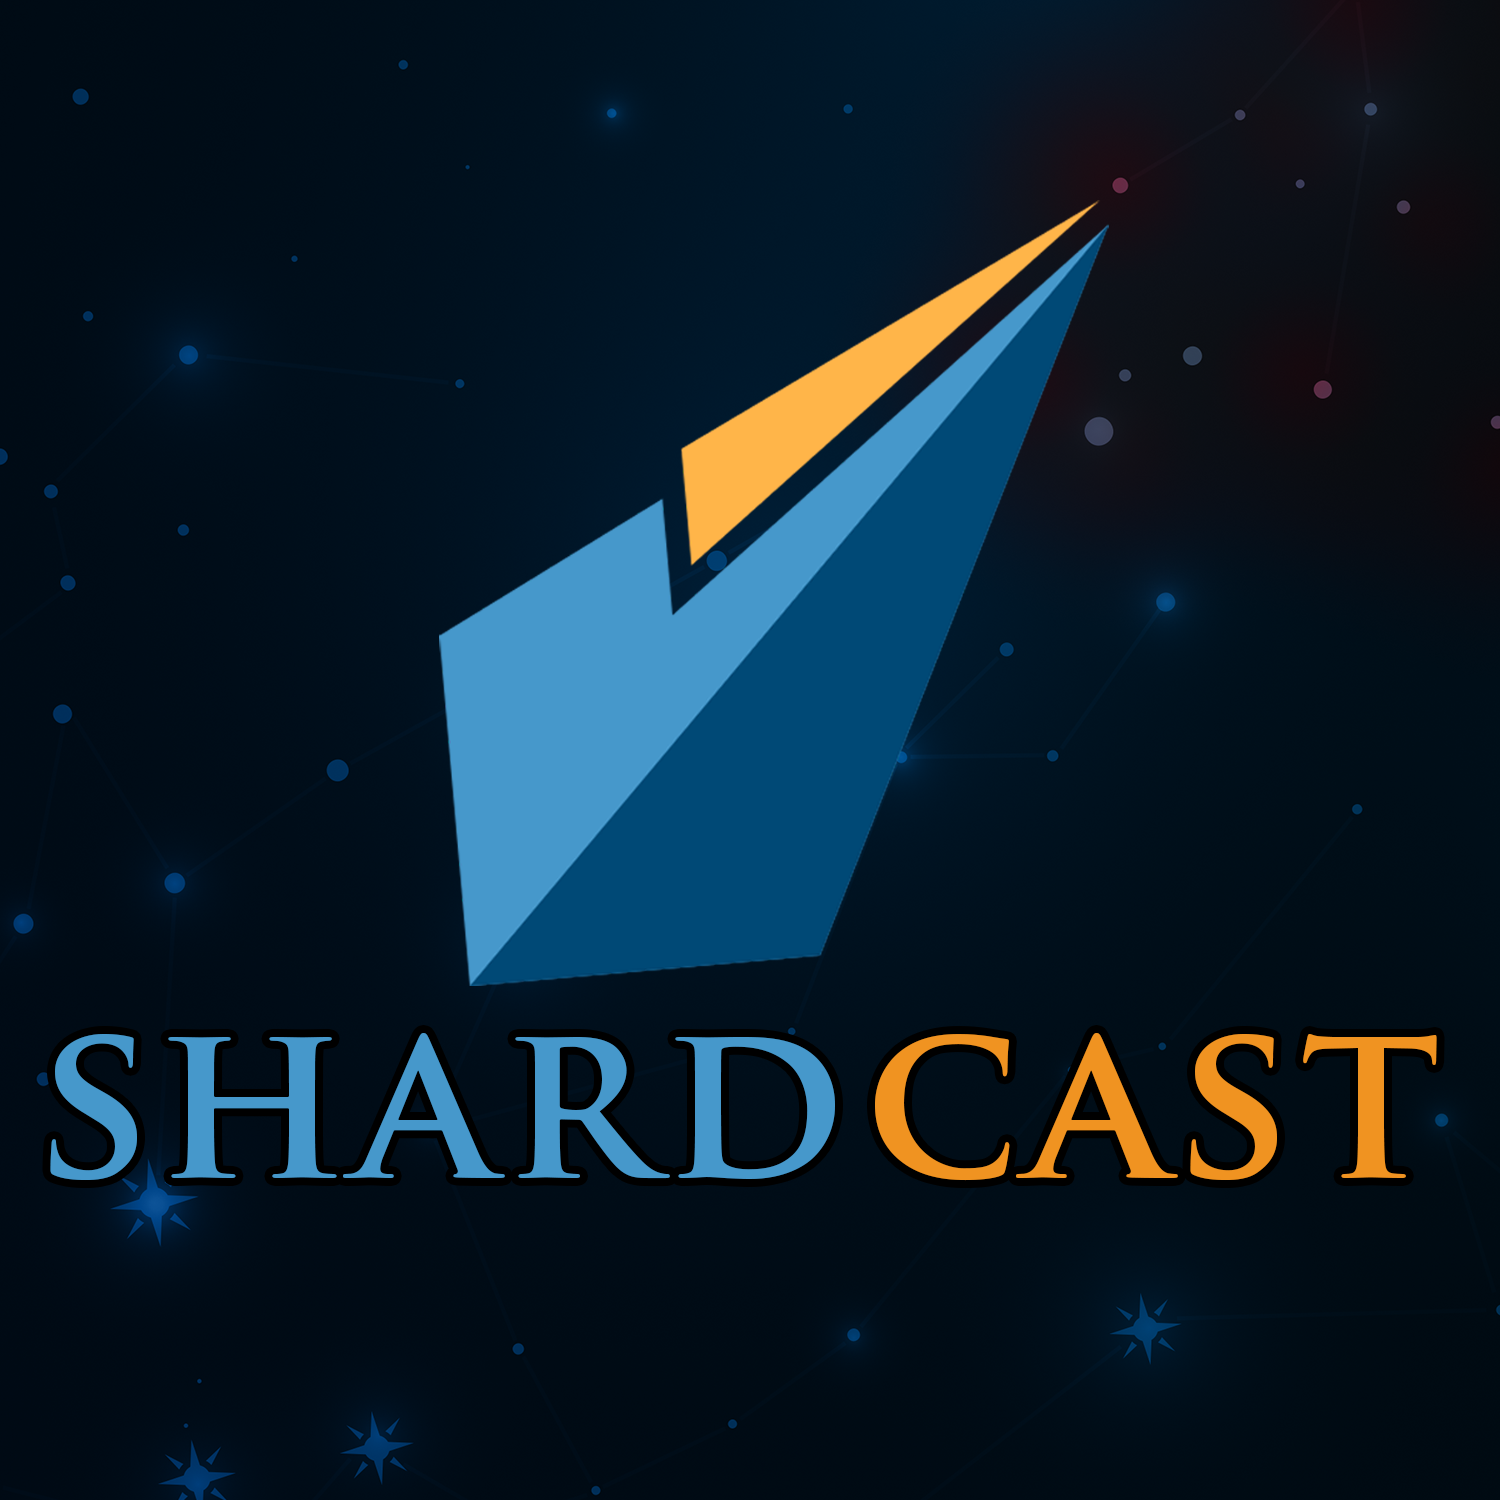 More information about "Shardcast: BONKERS Stormlight 5 Interlude + Interlude Speculation"